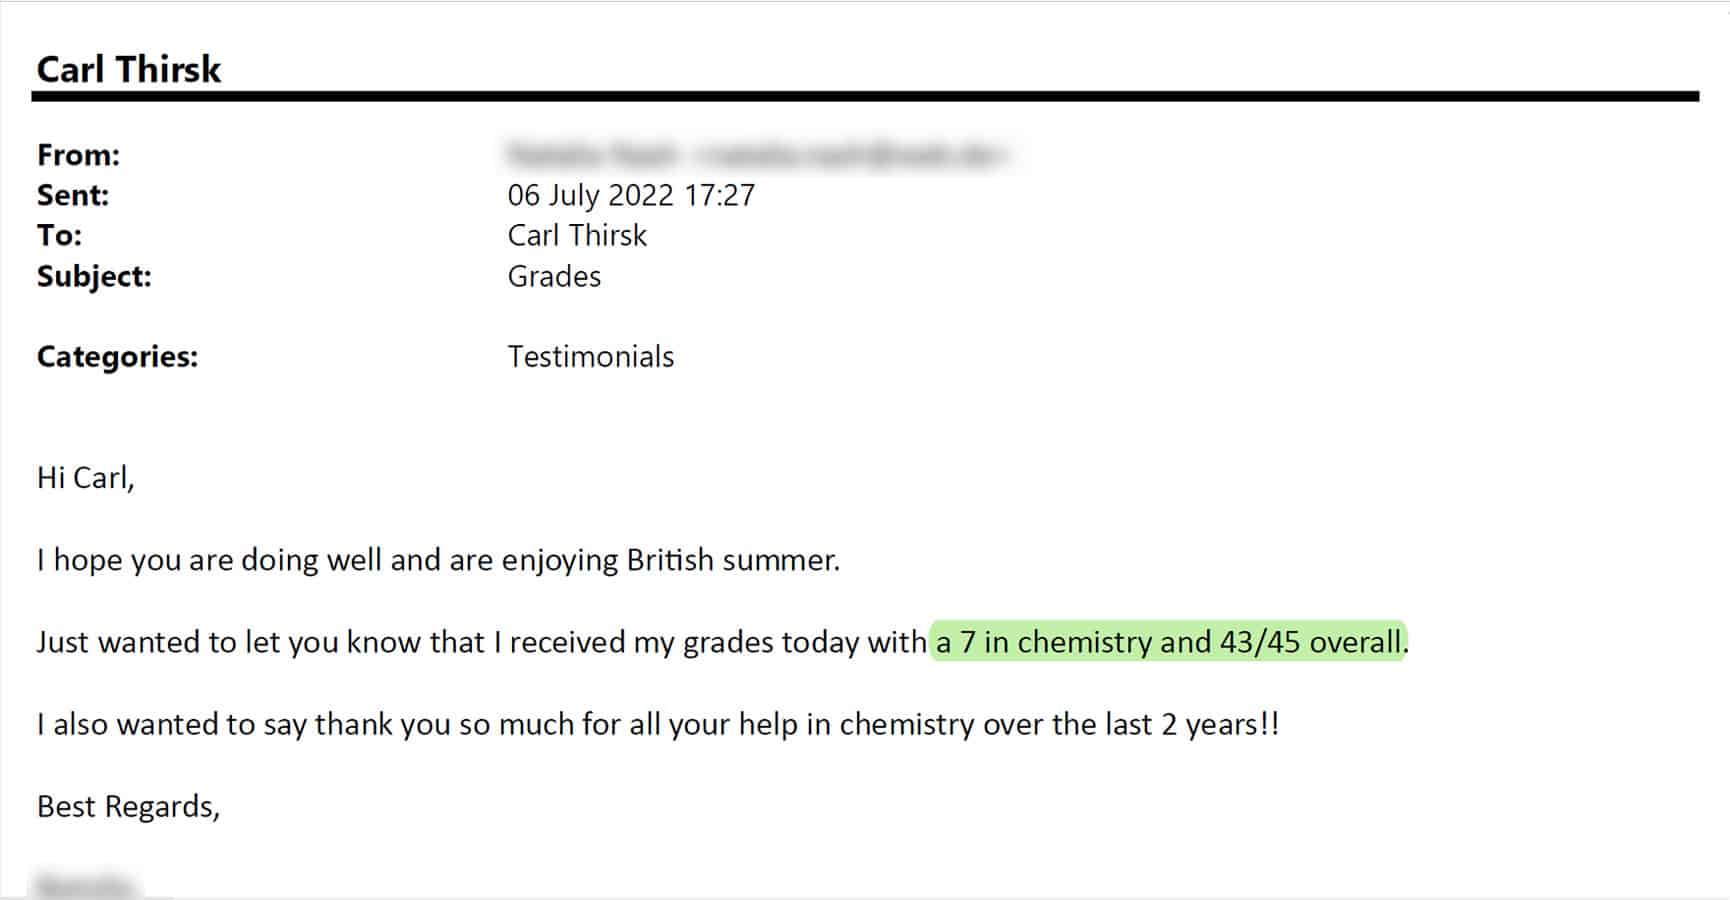 A testimonial email from an IB student